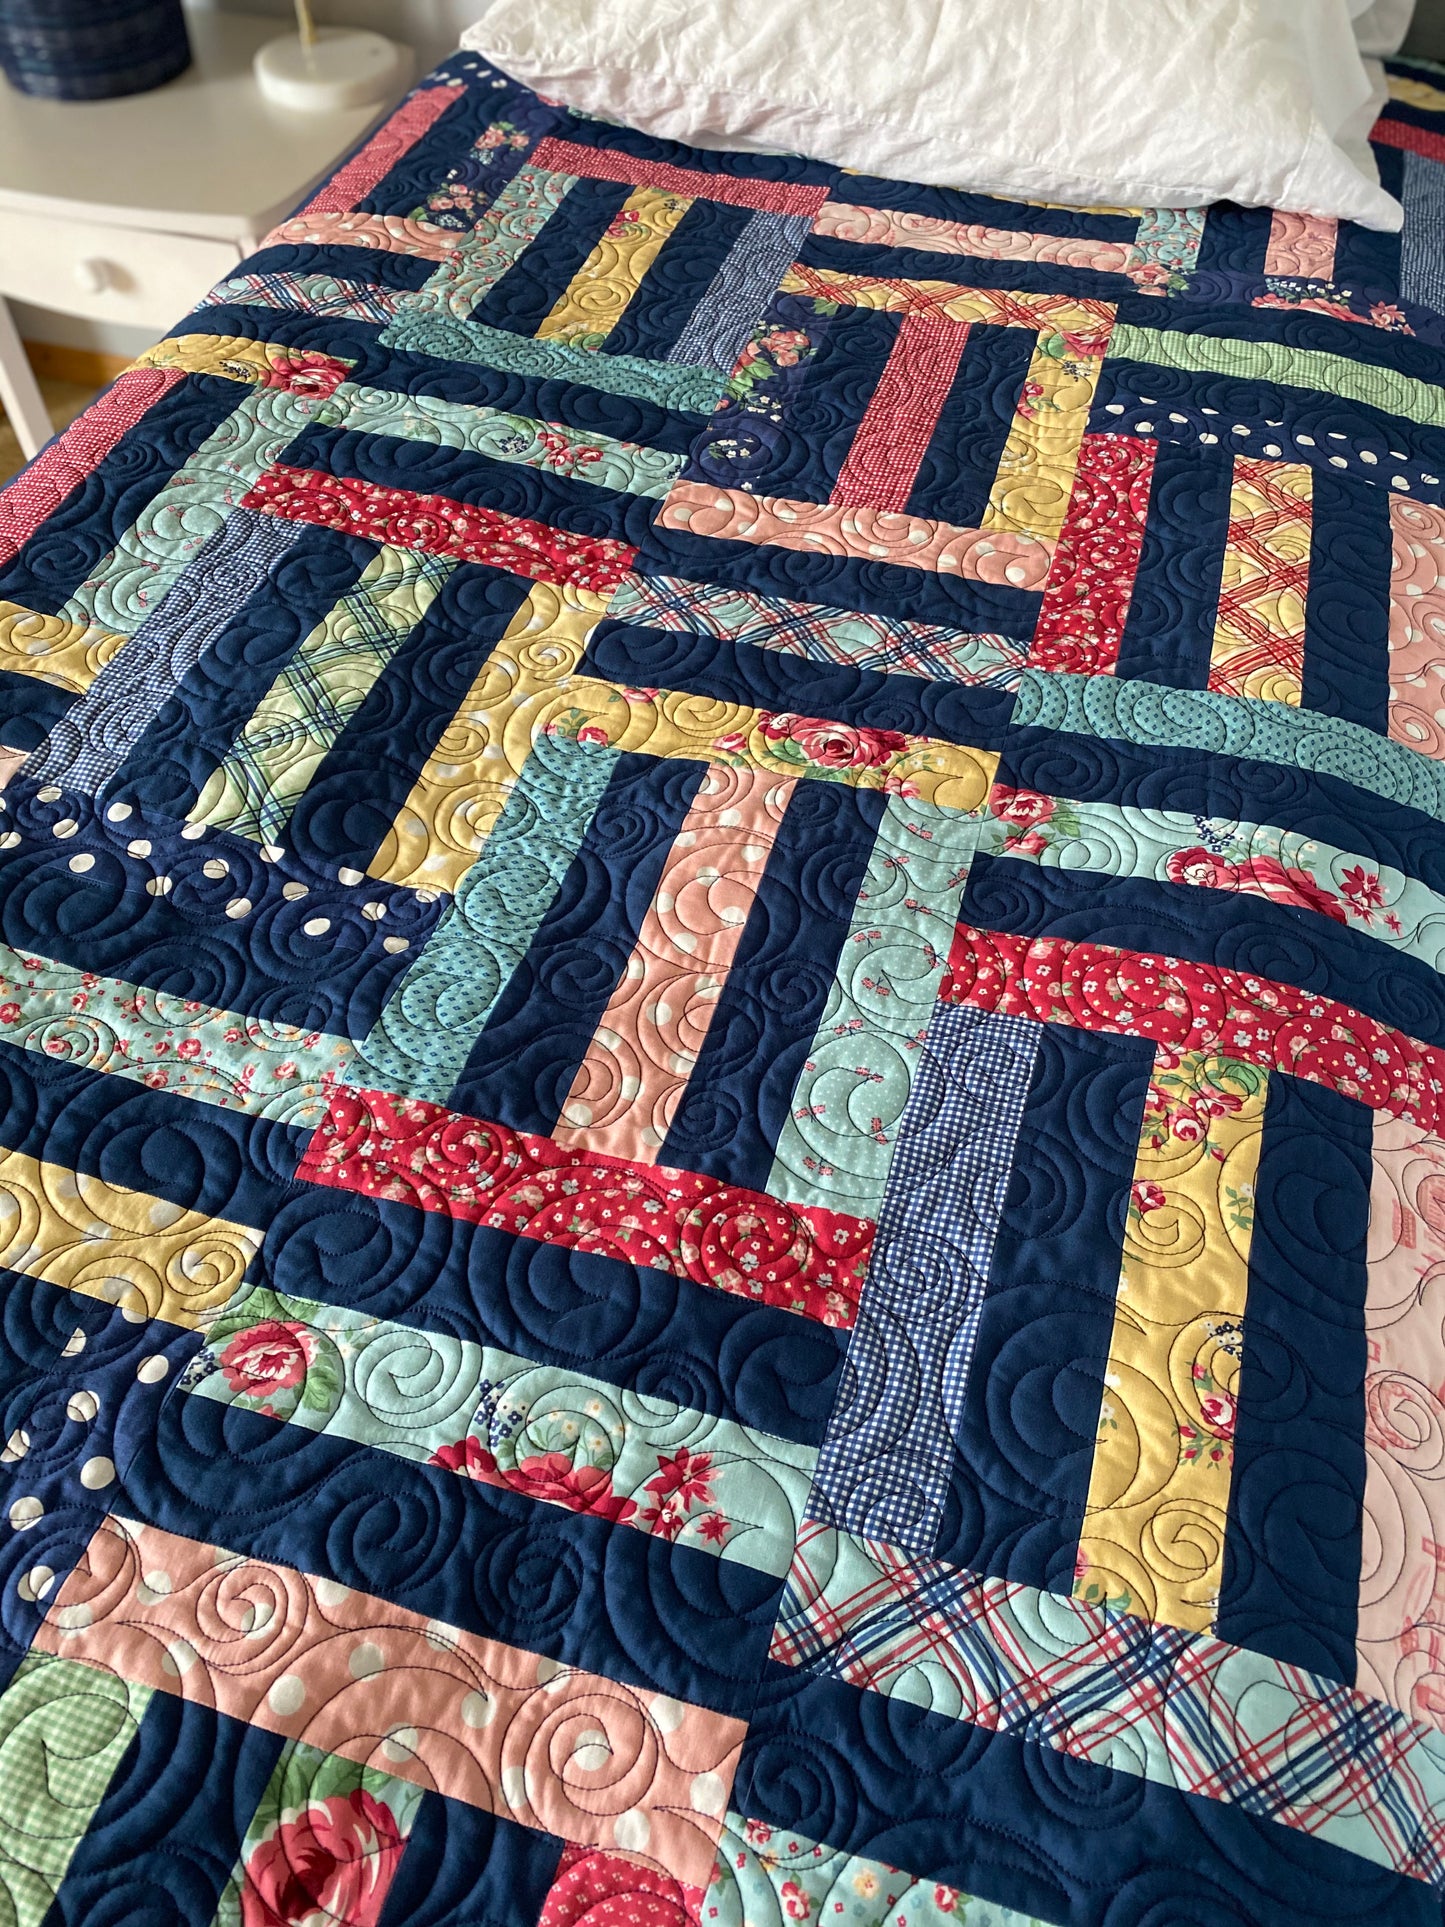 Skyline Divide Quilt Pattern PRINTED Busy Hands Quilts {$price}